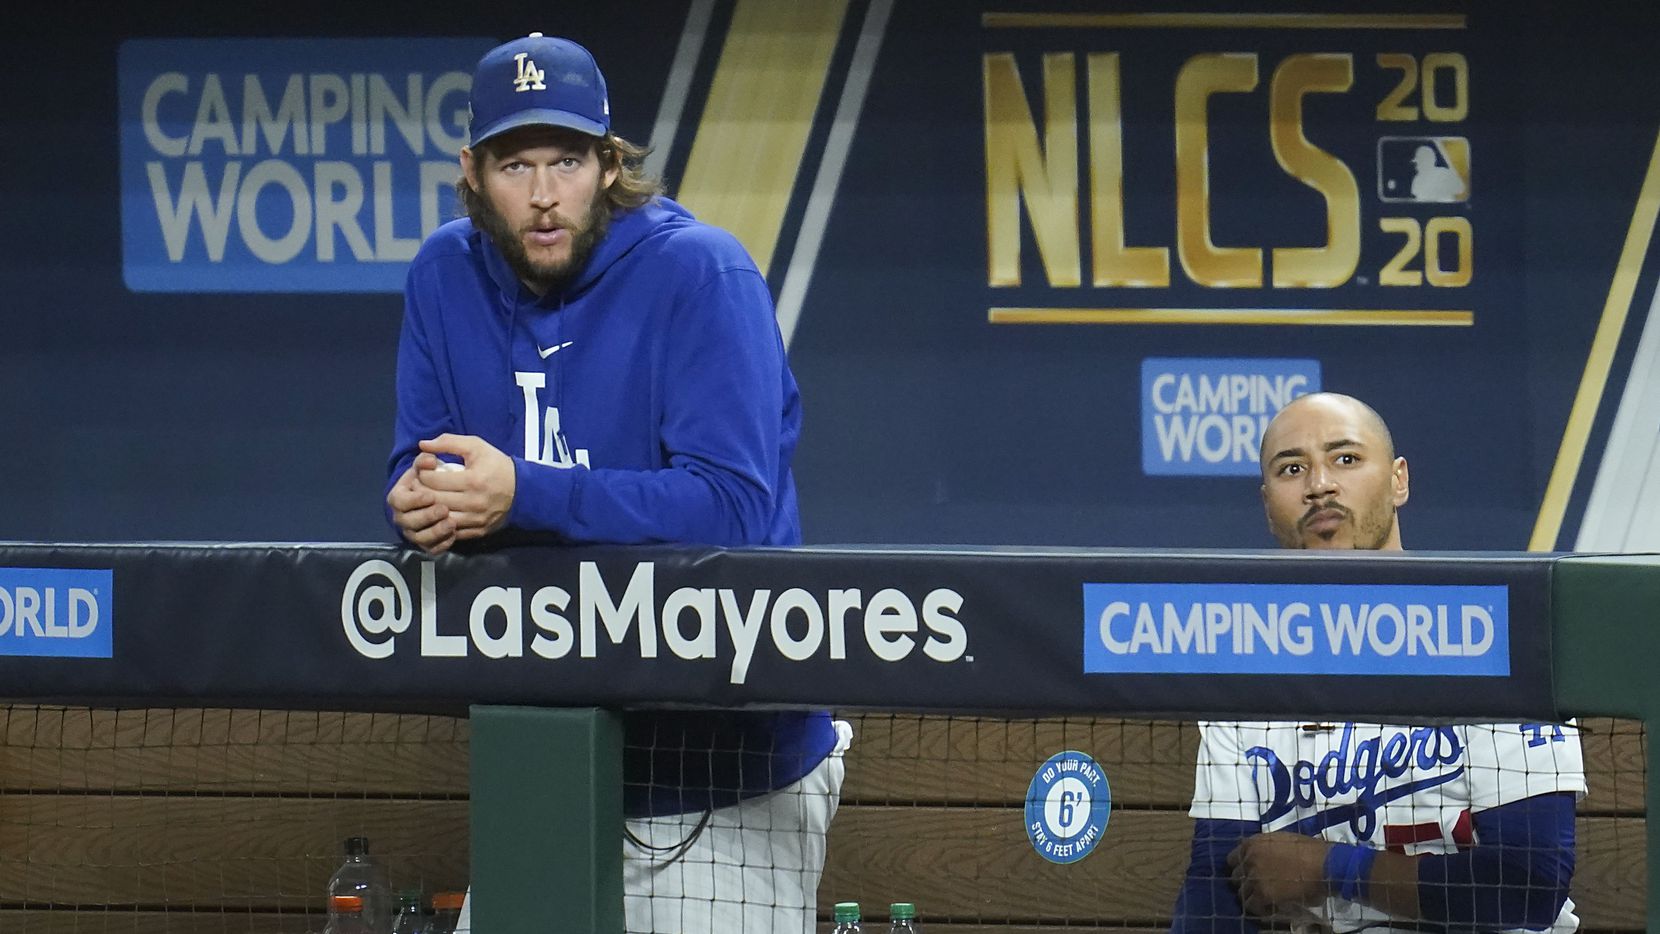 Manager spoke on Clayton Kershaw and the Dodgers tremble